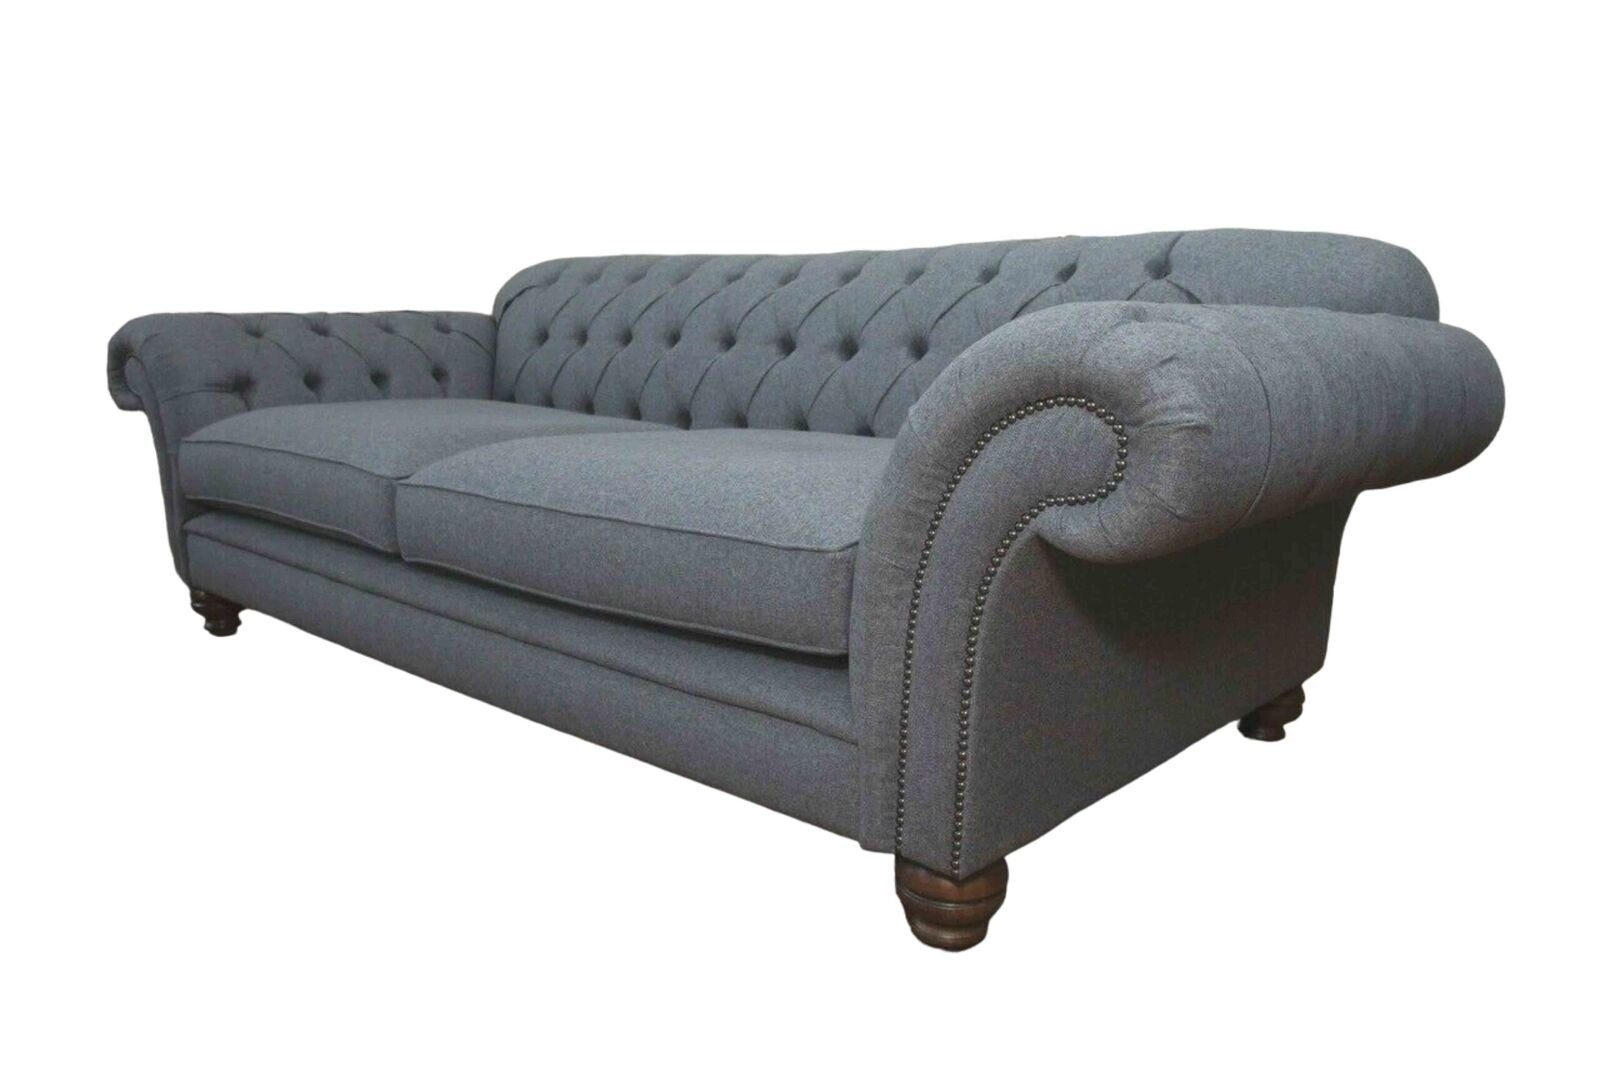 Textil Couch Europe Graues Sofa Made Sofa Chesterfield in JVmoebel 4 Polster Luxus Grau, Sitzer